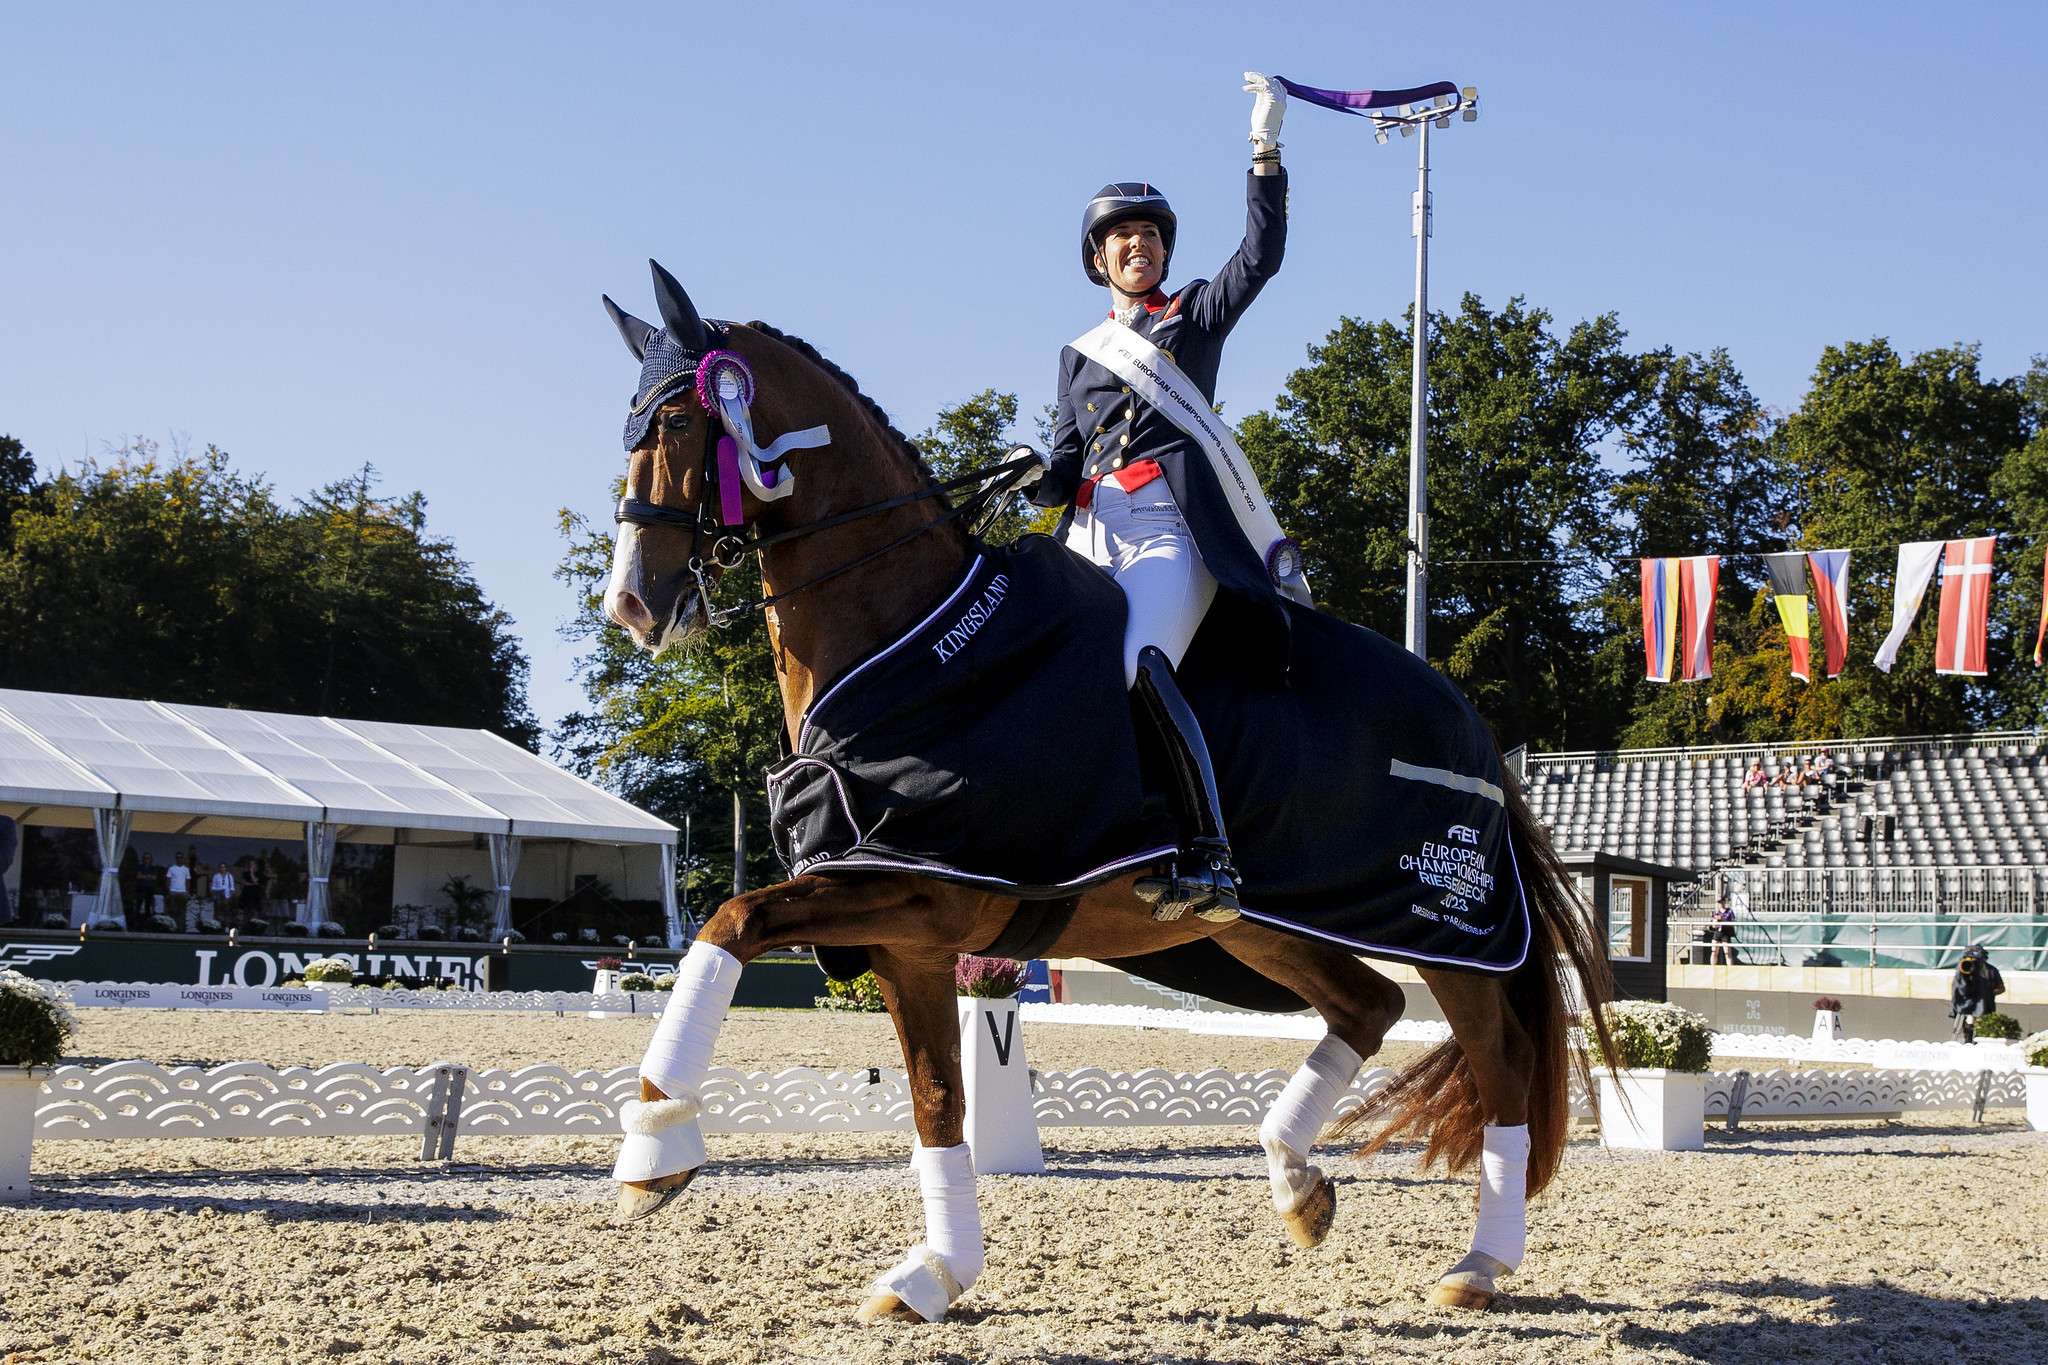 Charlotte Dujardin: A Triple Gold Medalist and a Passionate Equestrian